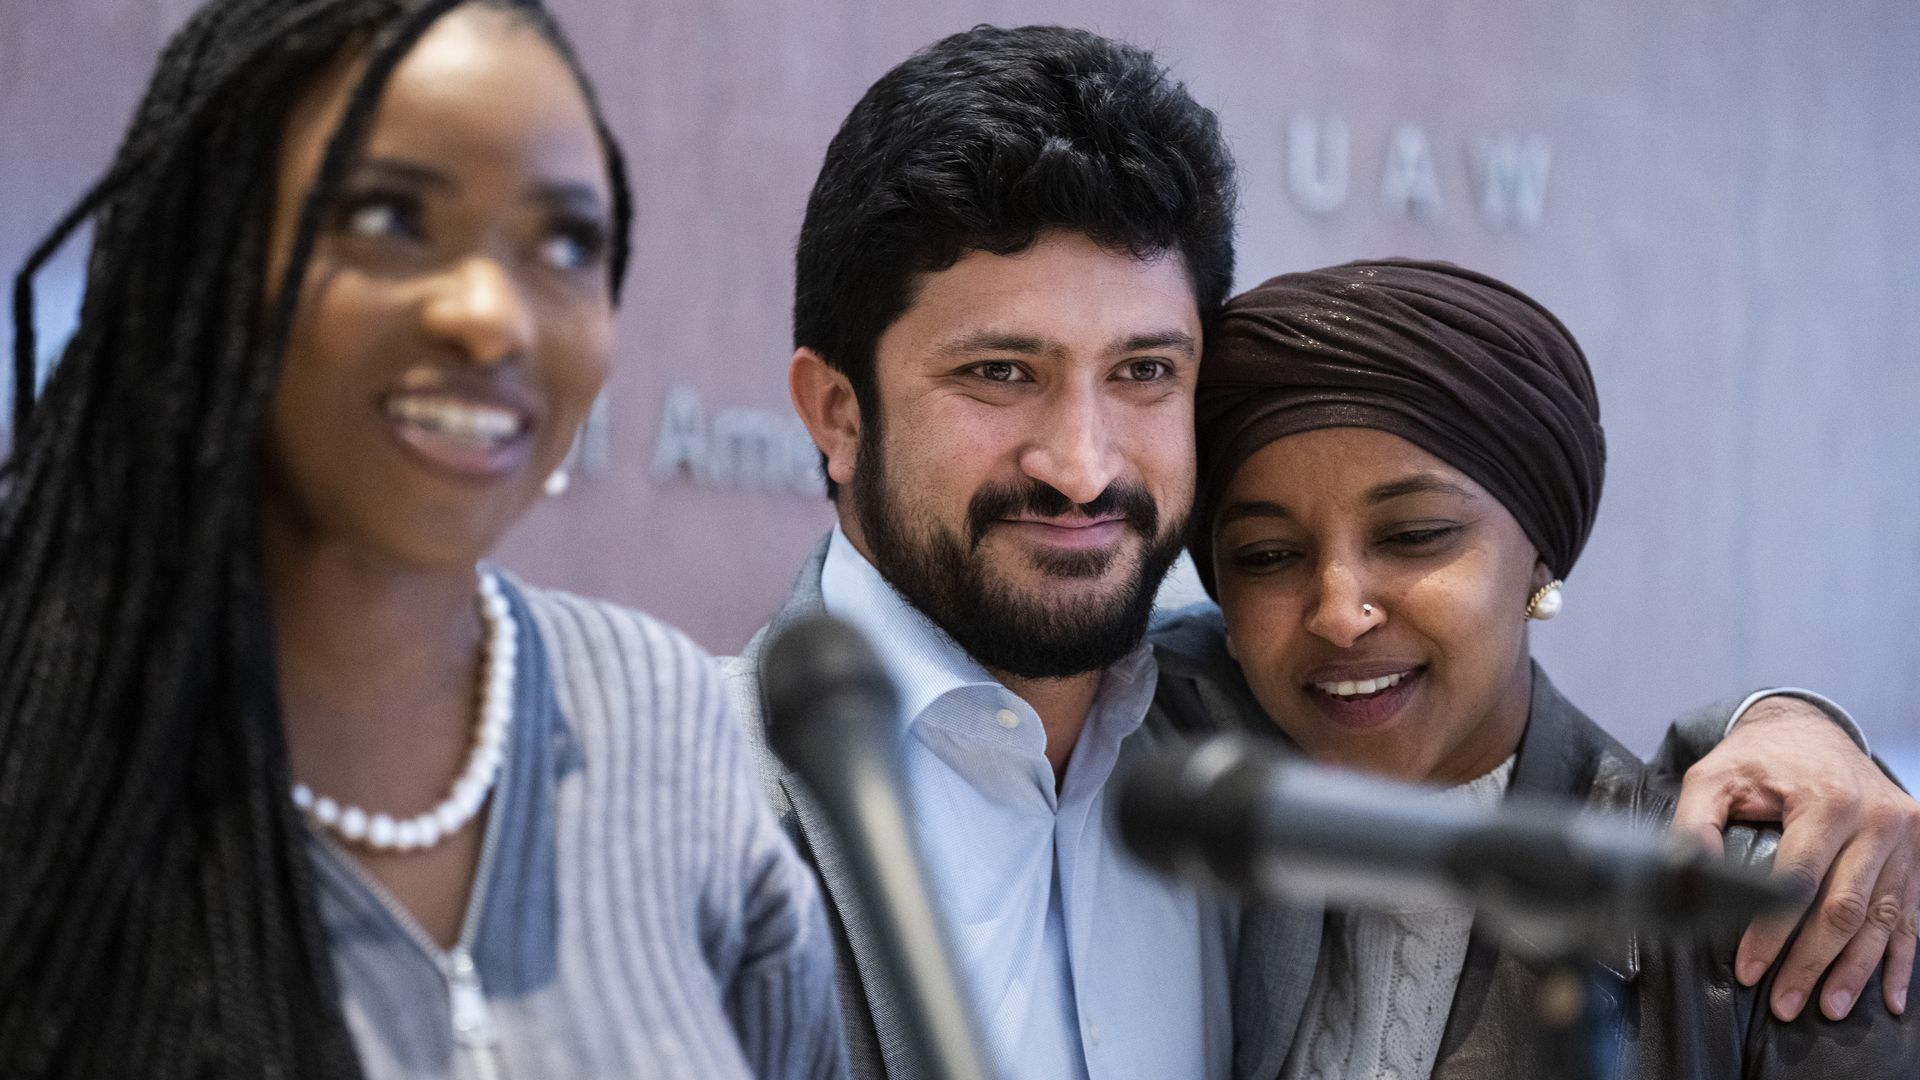 Reps. Greg Casar, wearing a light blue shirt, and Ilhan Omar, wearing a leather jacket, white sweater and brown headscarf.